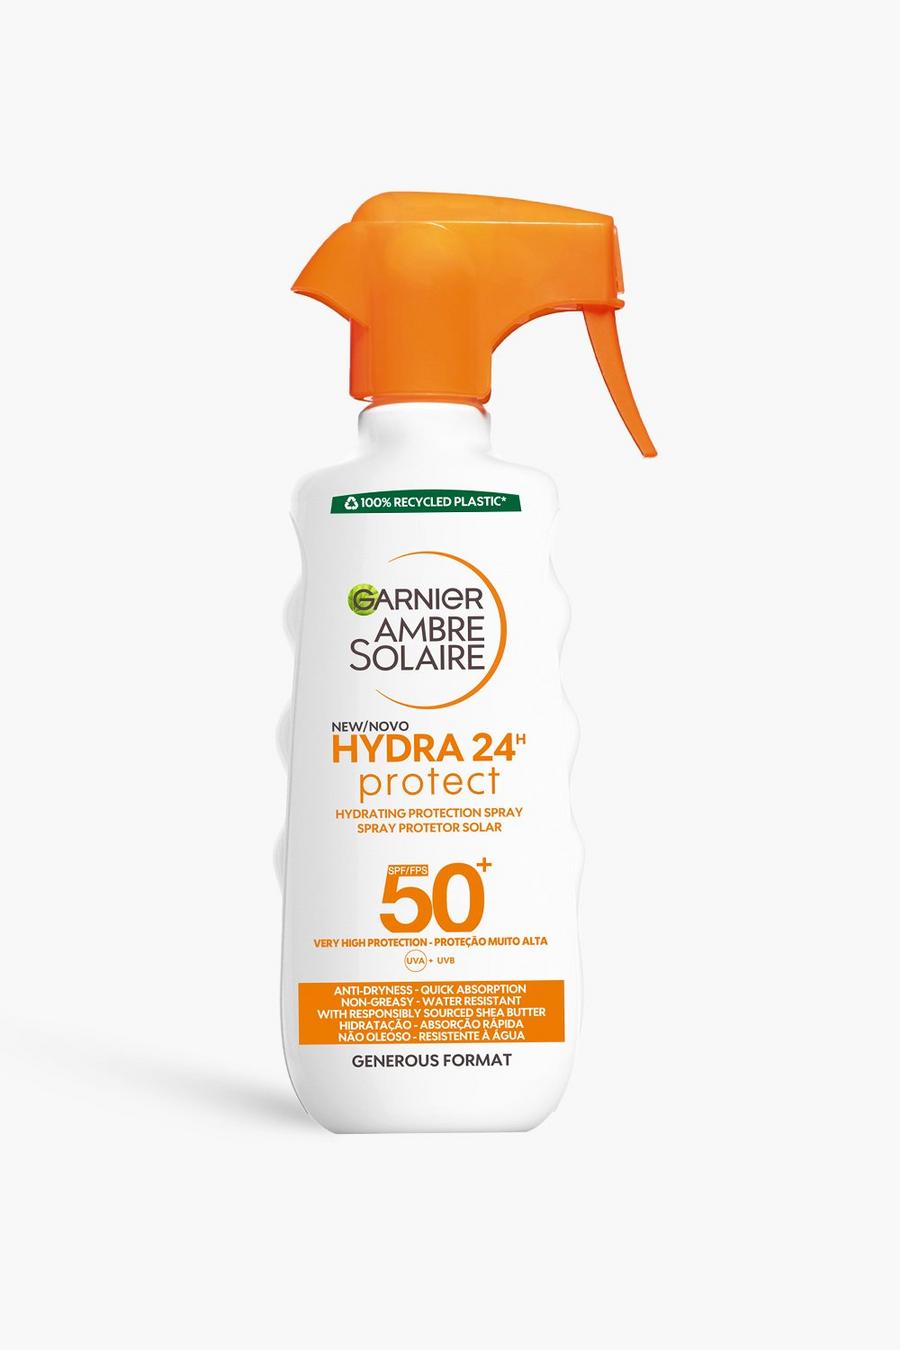 White vit Garnier Ambre Solaire Hydra 24 Hour Protect Hydrating Protection Spray SPF50, UVA & UVB Protection, 300ml (SAVE 31%)